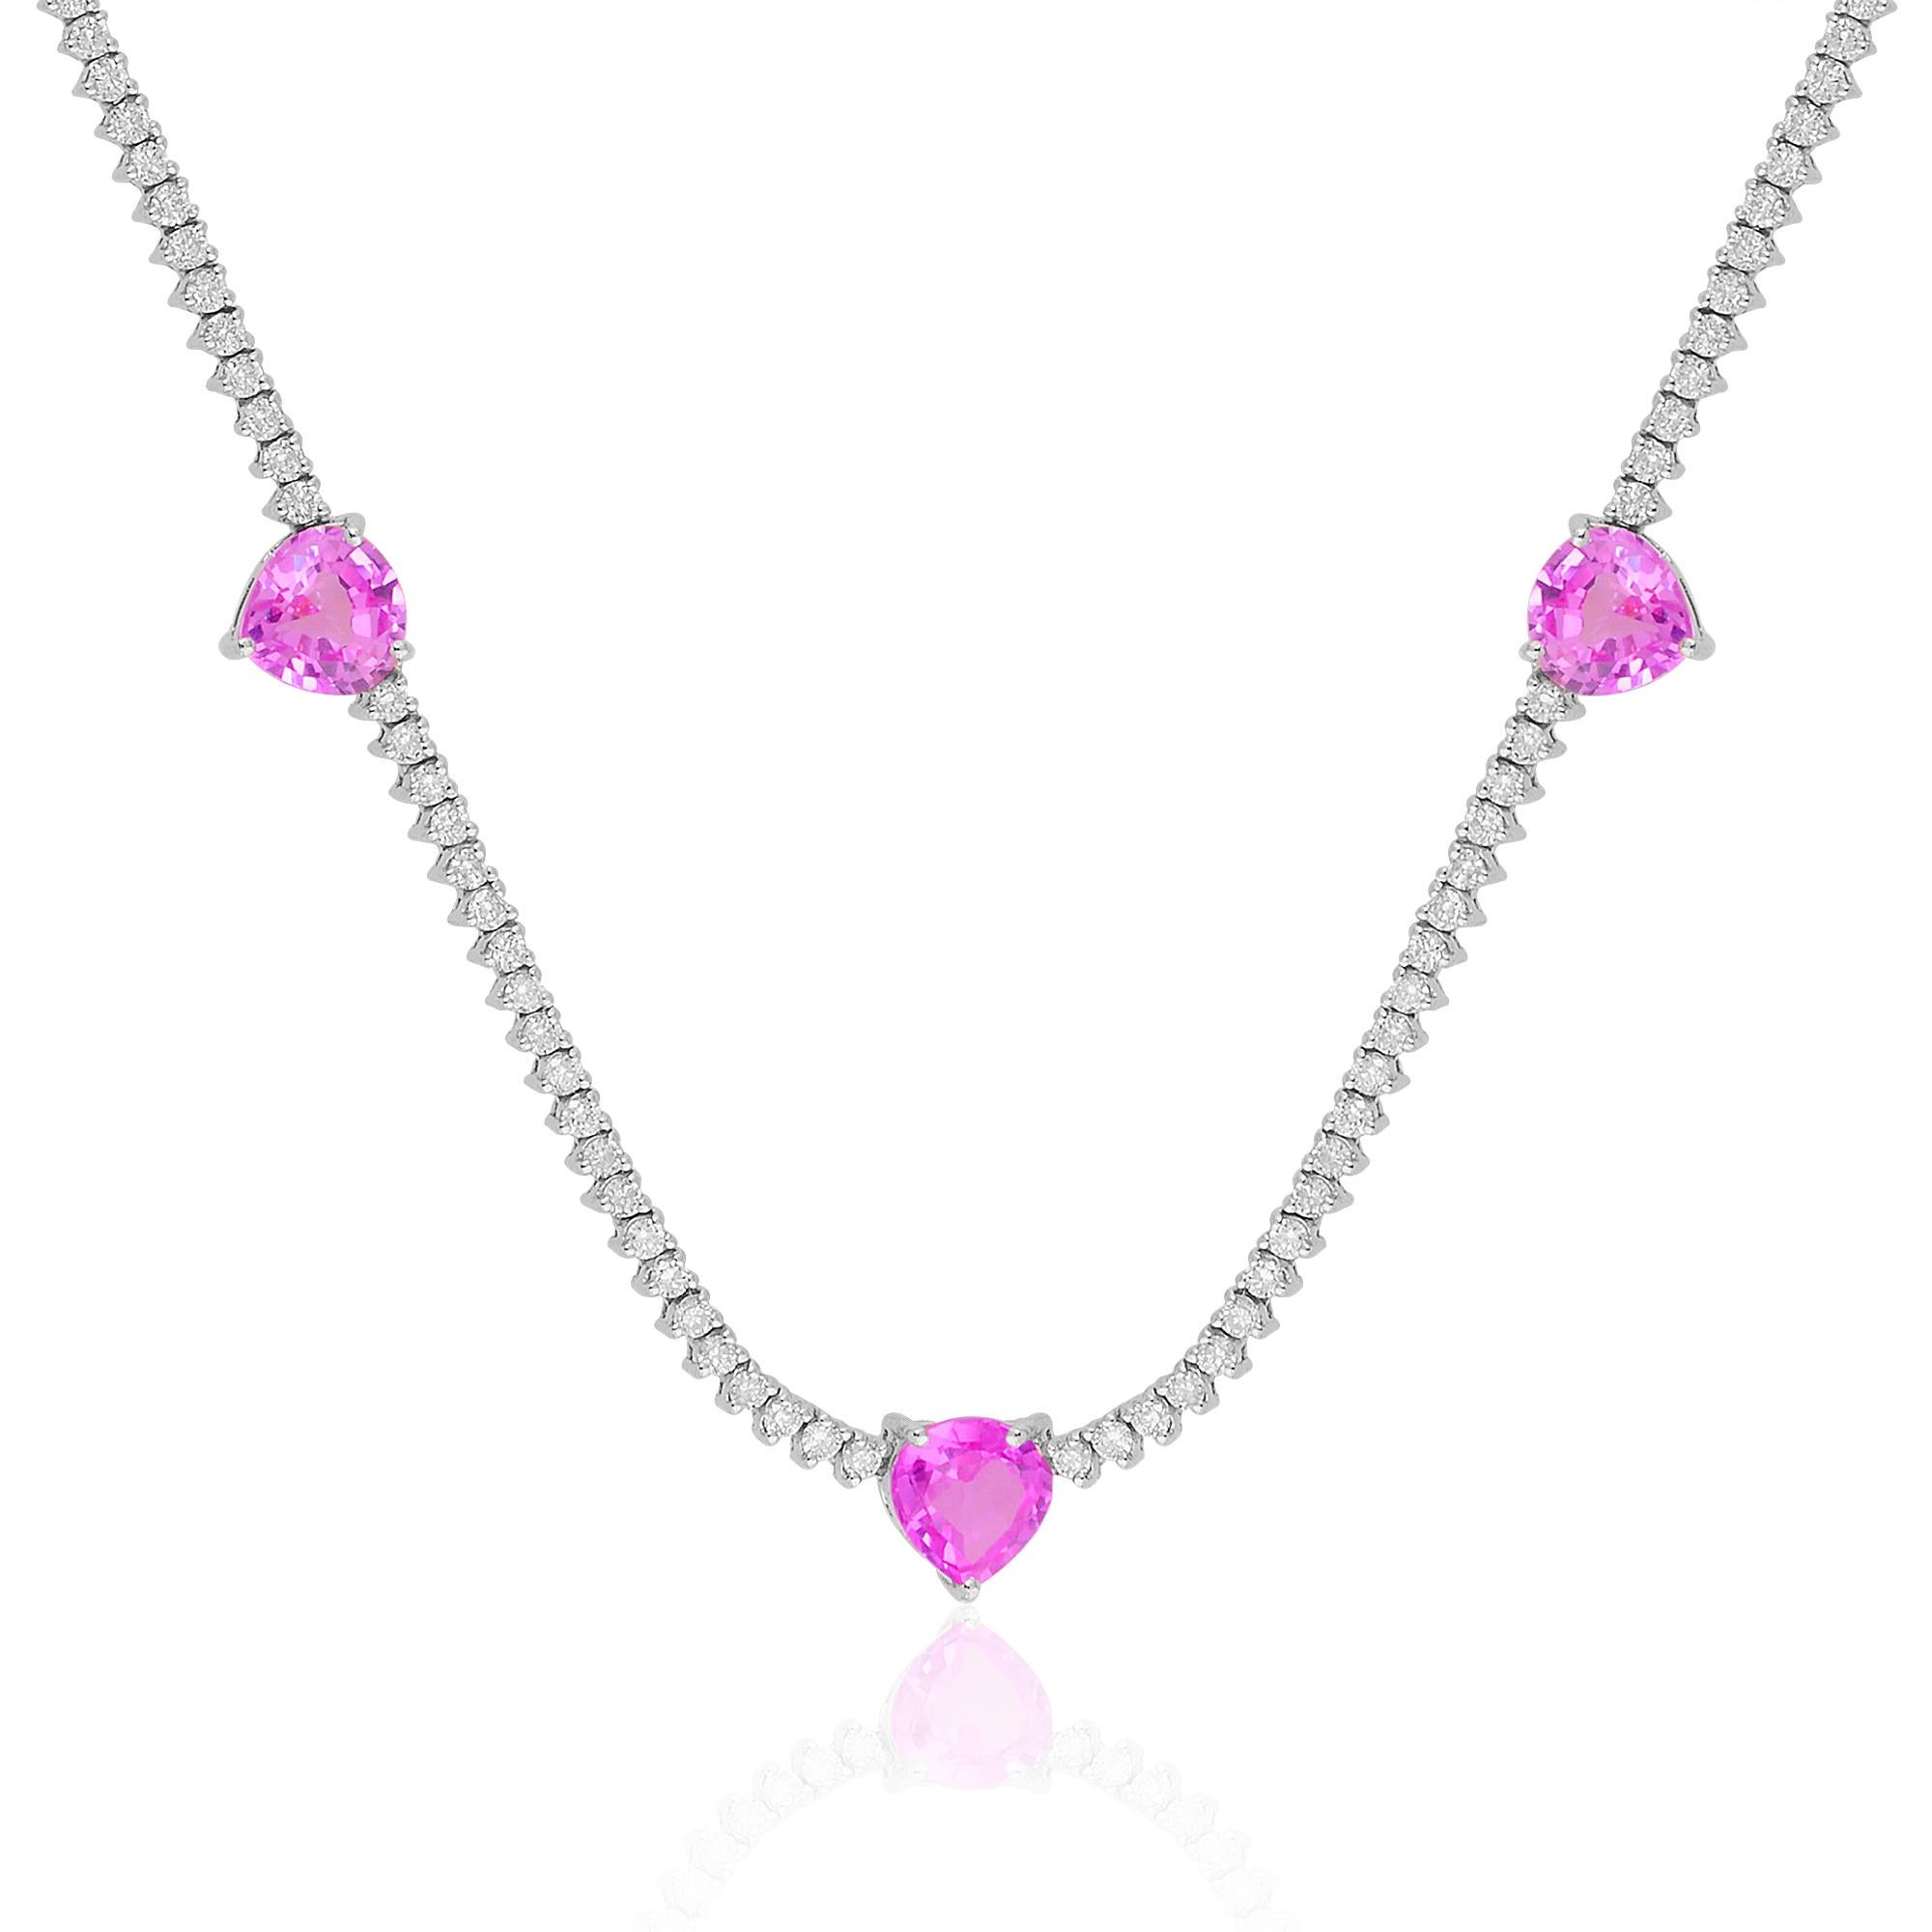 Presenting this exquisite heart-shaped pink gemstone necklace, adorned with diamond accents, crafted in 18 karat white gold. This stunning handmade jewelry piece exudes elegance and charm, making it a perfect accessory for any special occasion or as